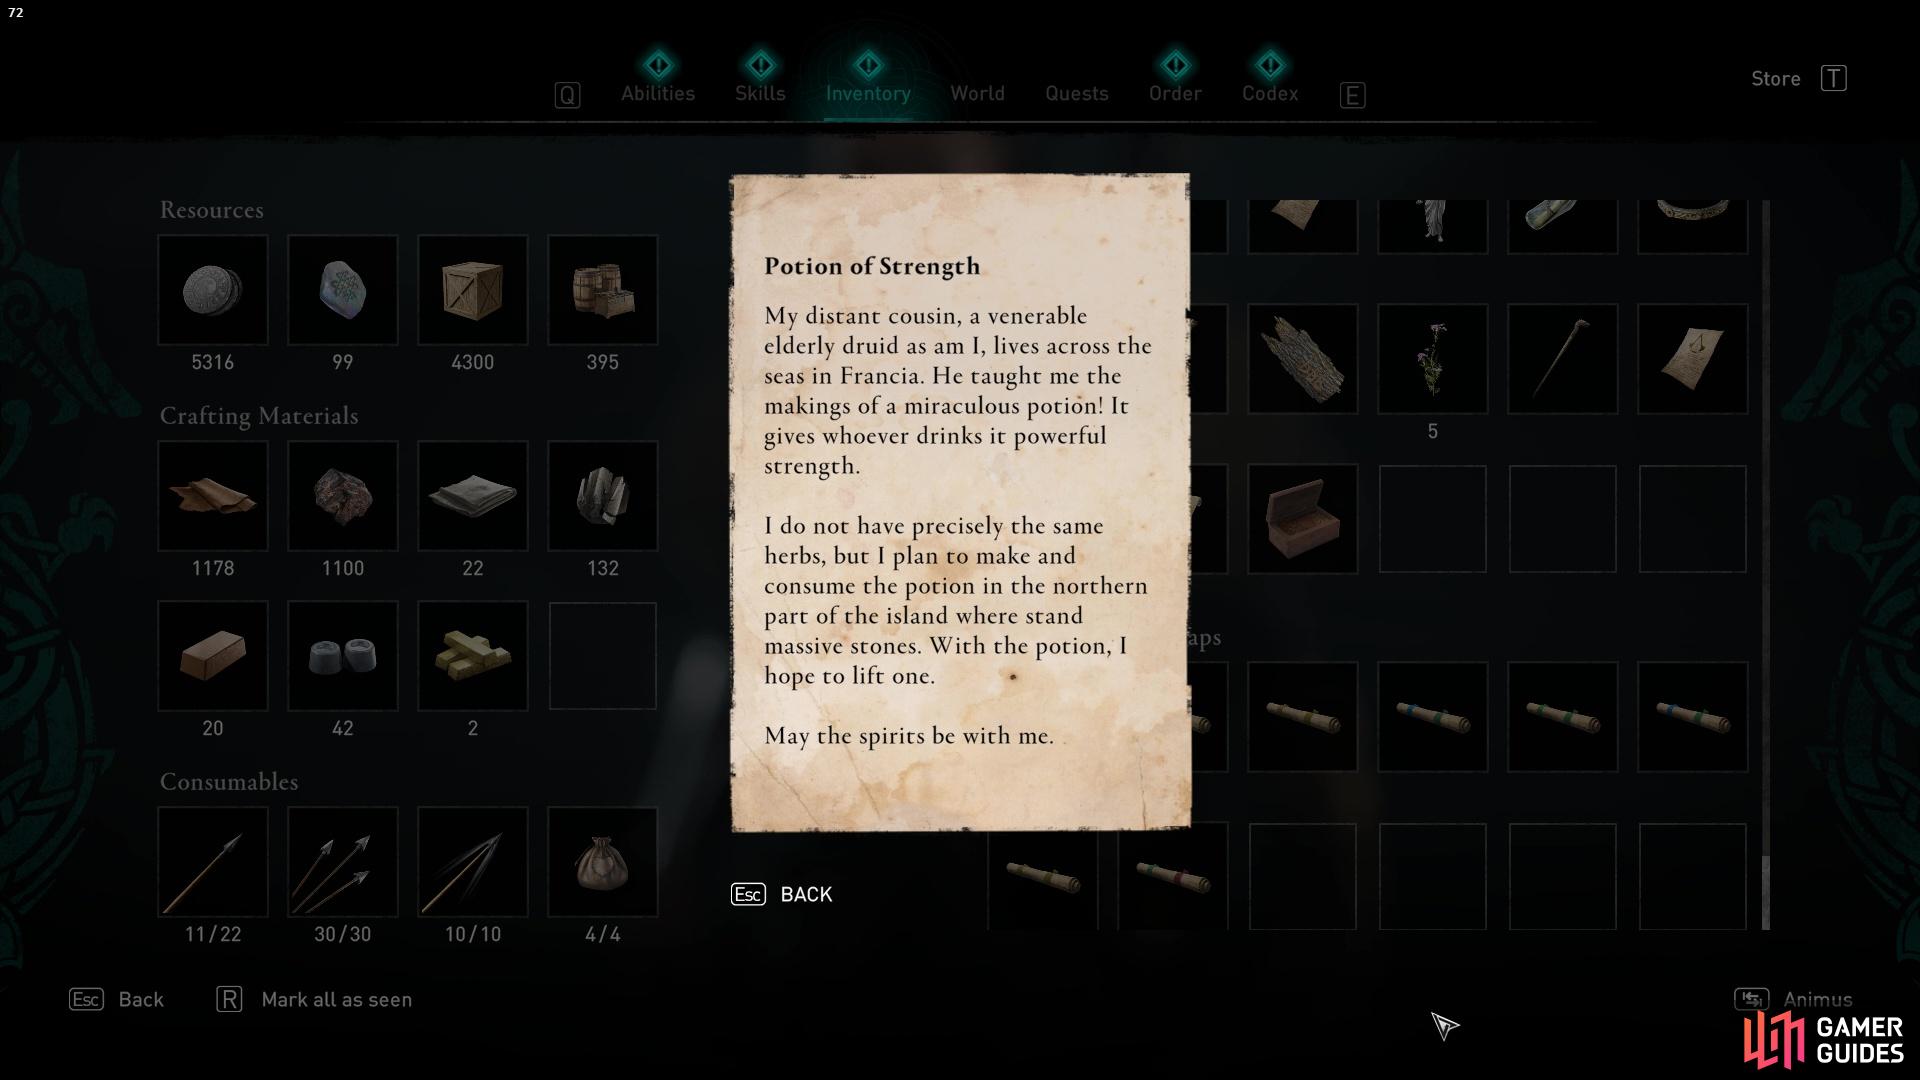 The treasure hoard map will reveal information about some standing stones found on the island.